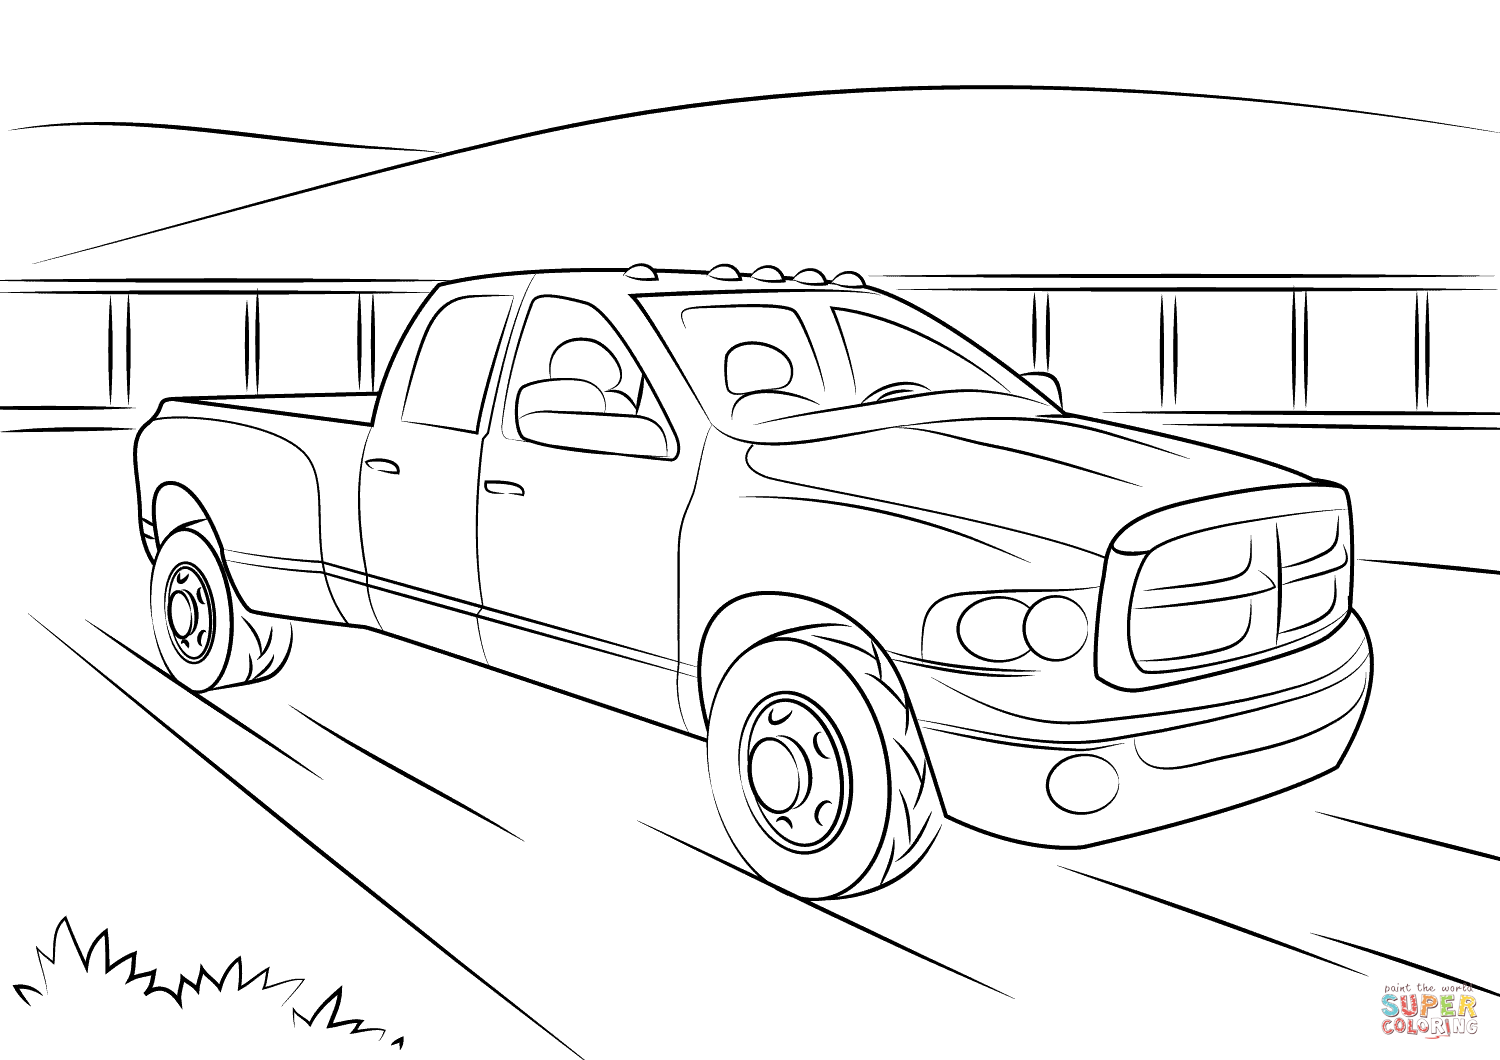 Dodge ram coloring page free printable coloring pages